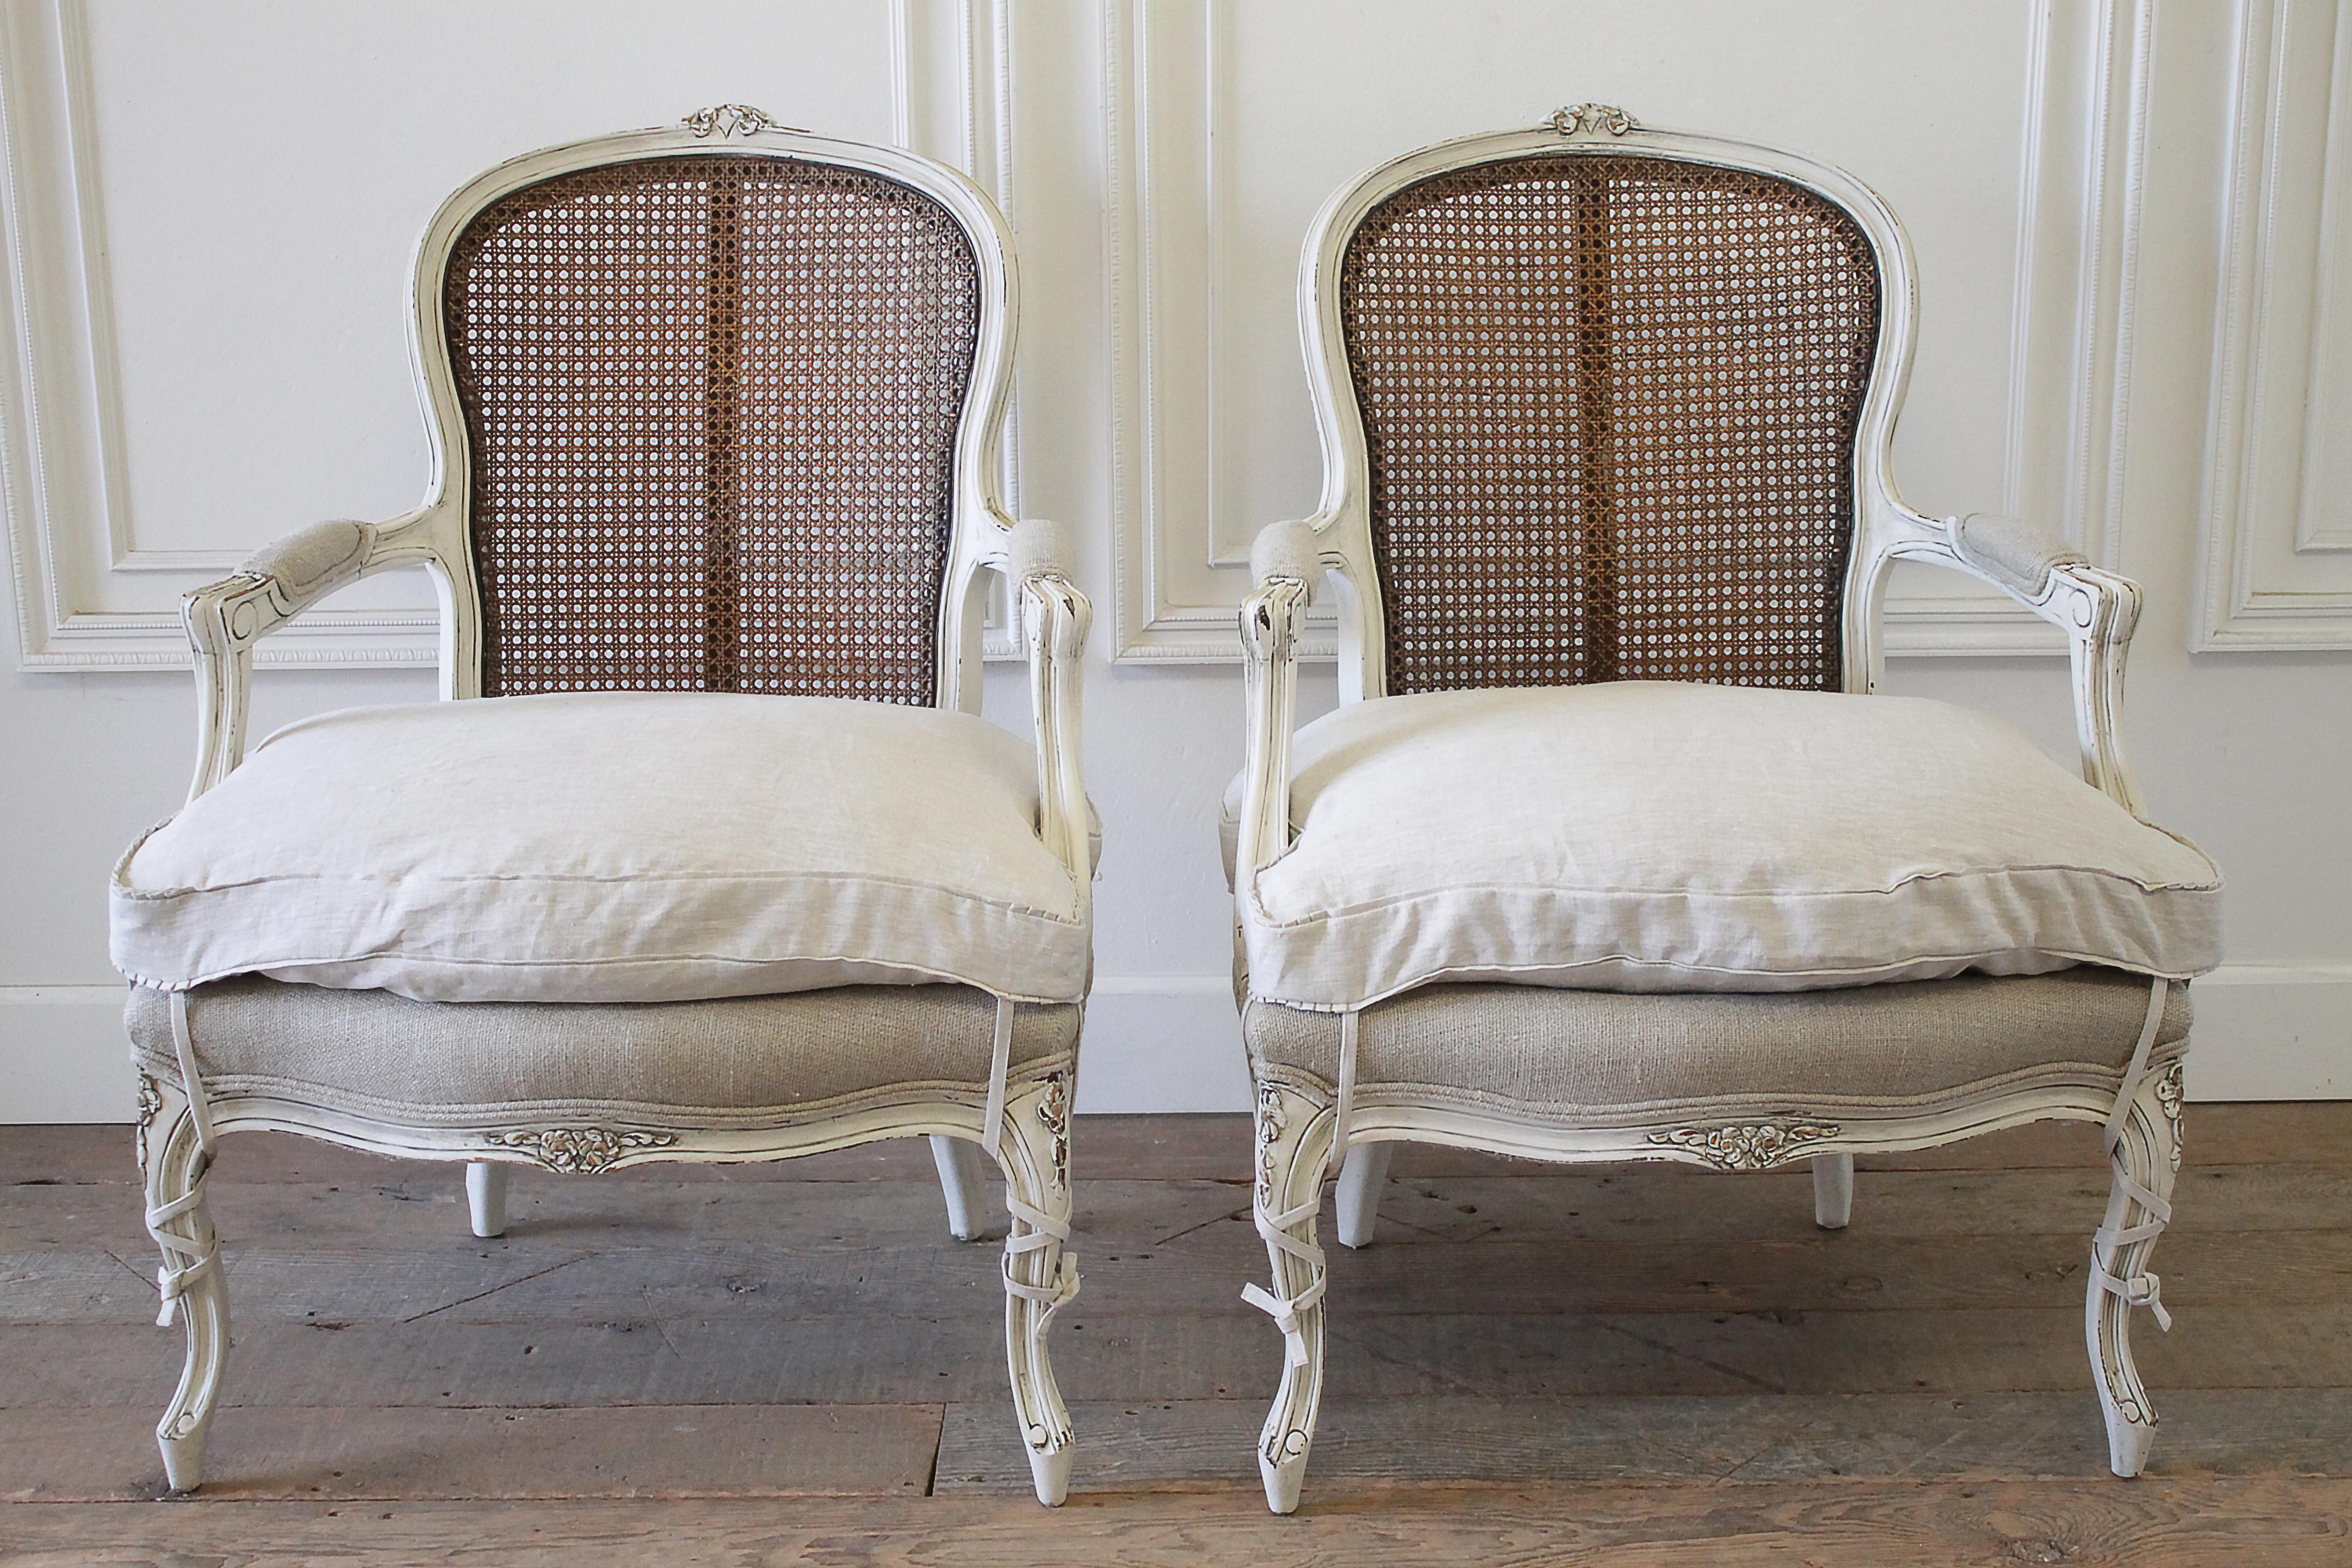 20th century pair of painted Louis XV style painted cane back chairs
Painted in a soft oyster white color with subtle distressed edges, and glazed patina. Original dark petite cane backs are in good condition. These chairs are solid and sturdy,